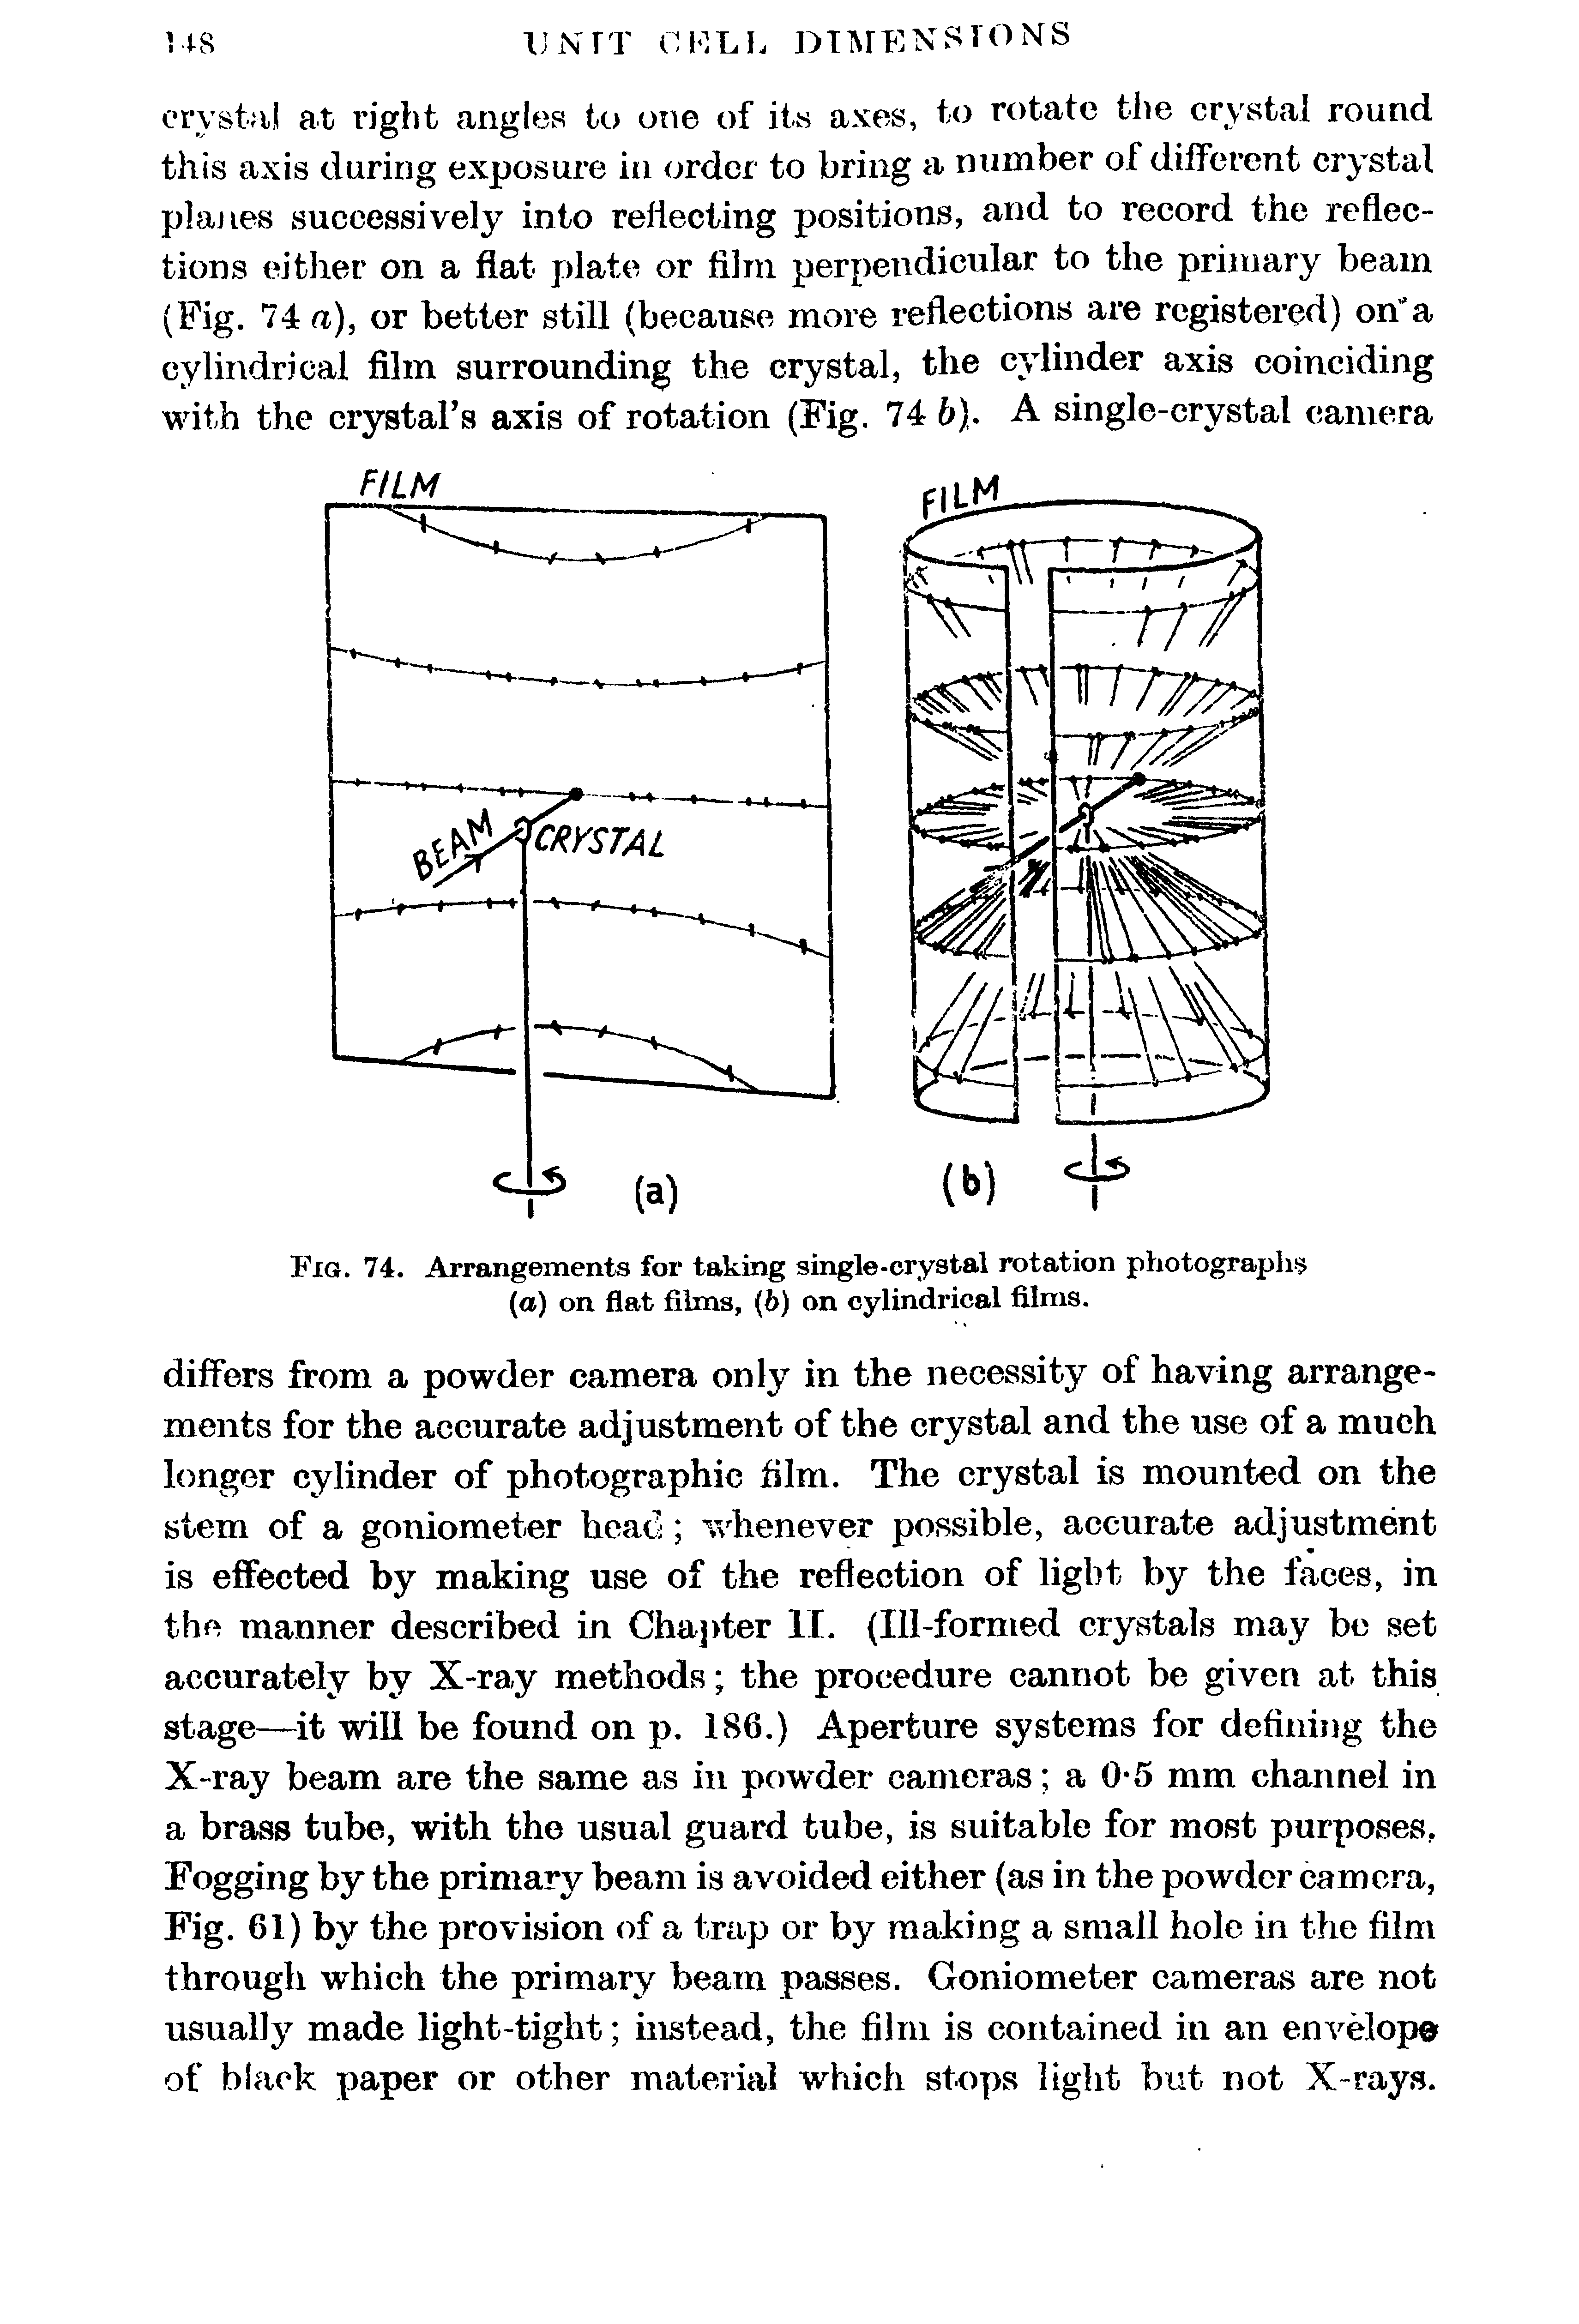 Fig. 74. Arrangements for taking single-crystal rotation photographs (a) on flat films, (6) on cylindrical films.